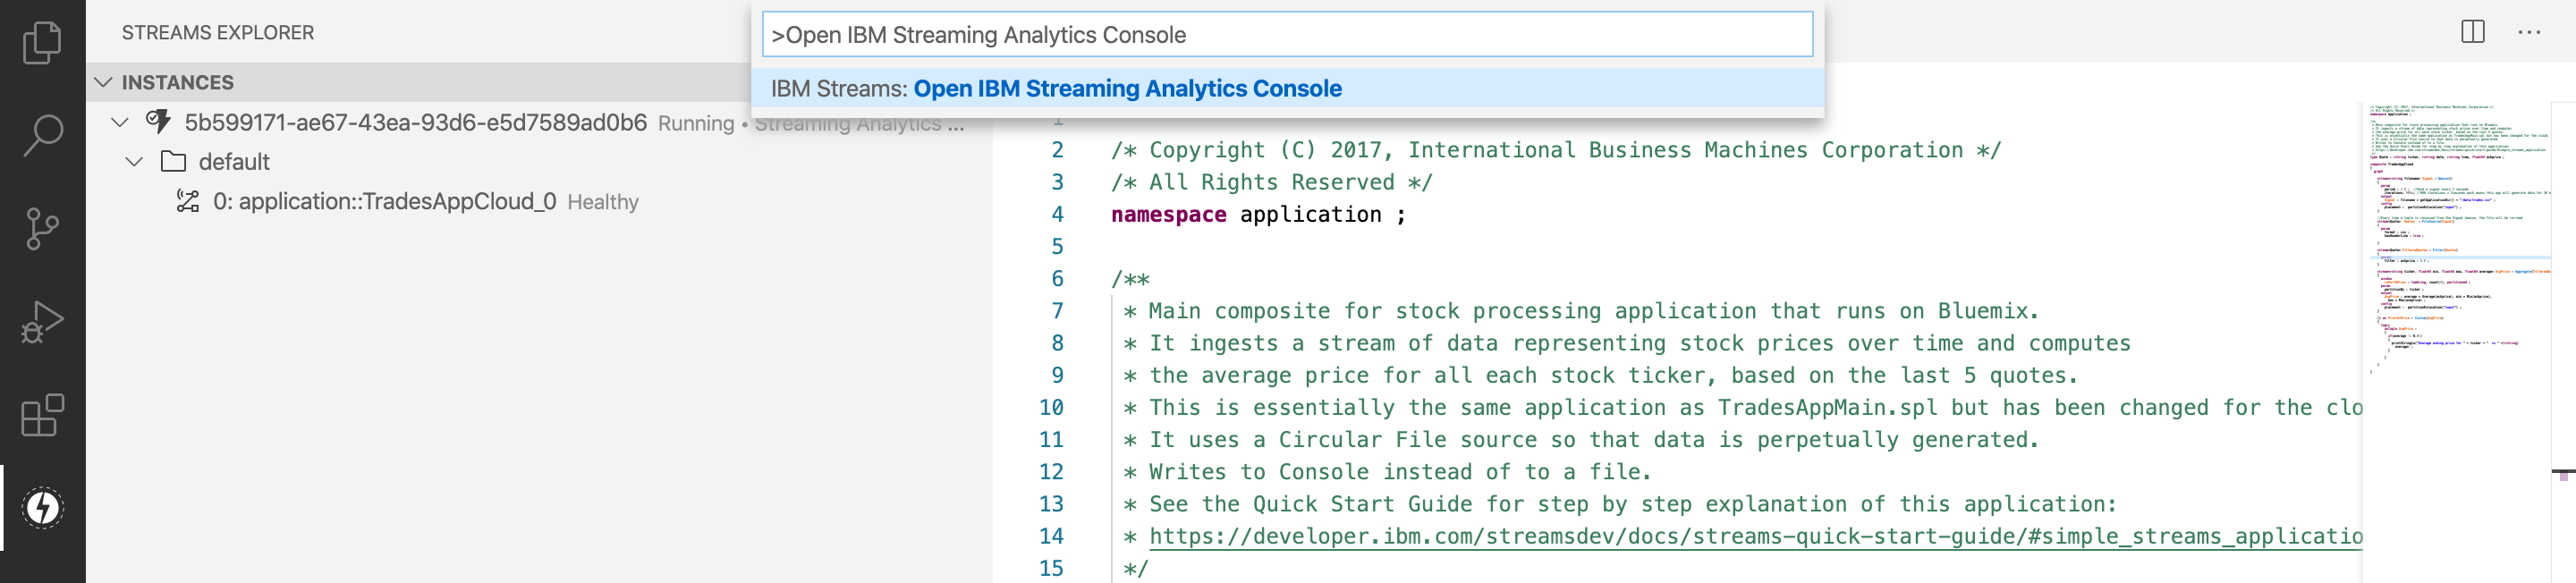 Launch Streams Console: Open IBM Streaming Analytics Console command